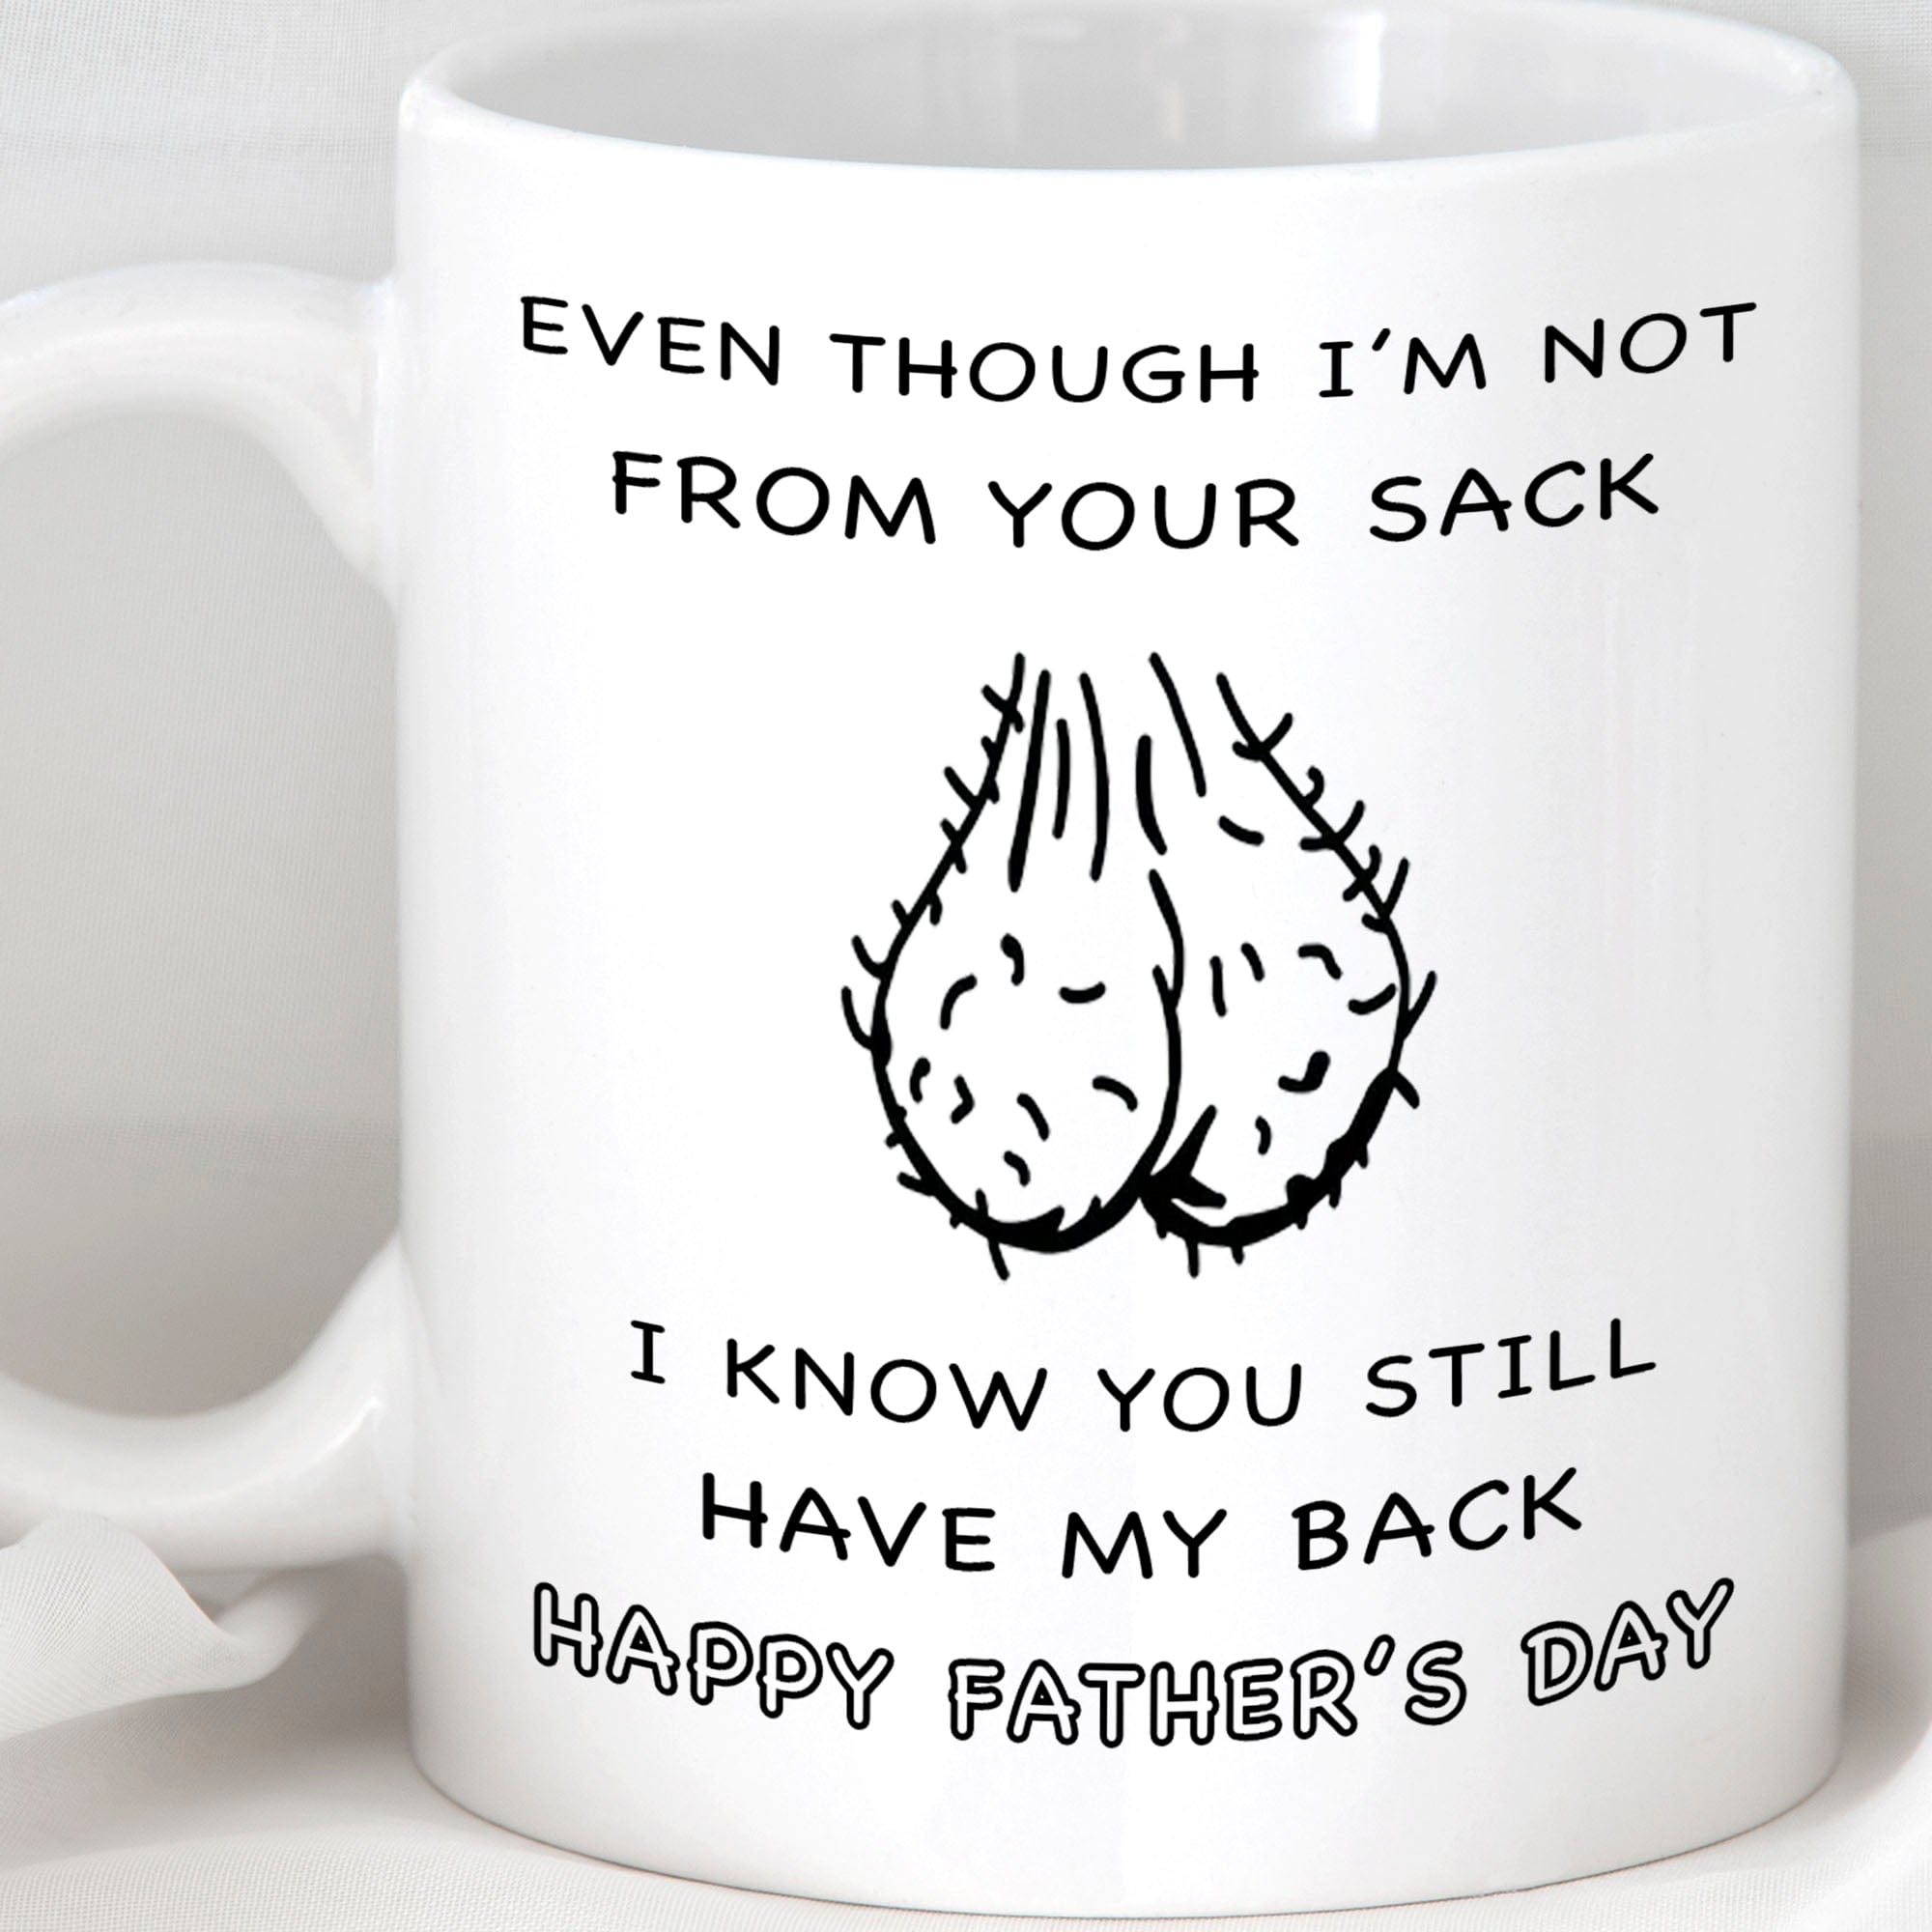 GeckoCustom Even Though I'm Not From Your Sack, I Know You Still Have My Back. Step Dad Father's Day Gift, Funny Dad Mug C329 11oz / White / One Size